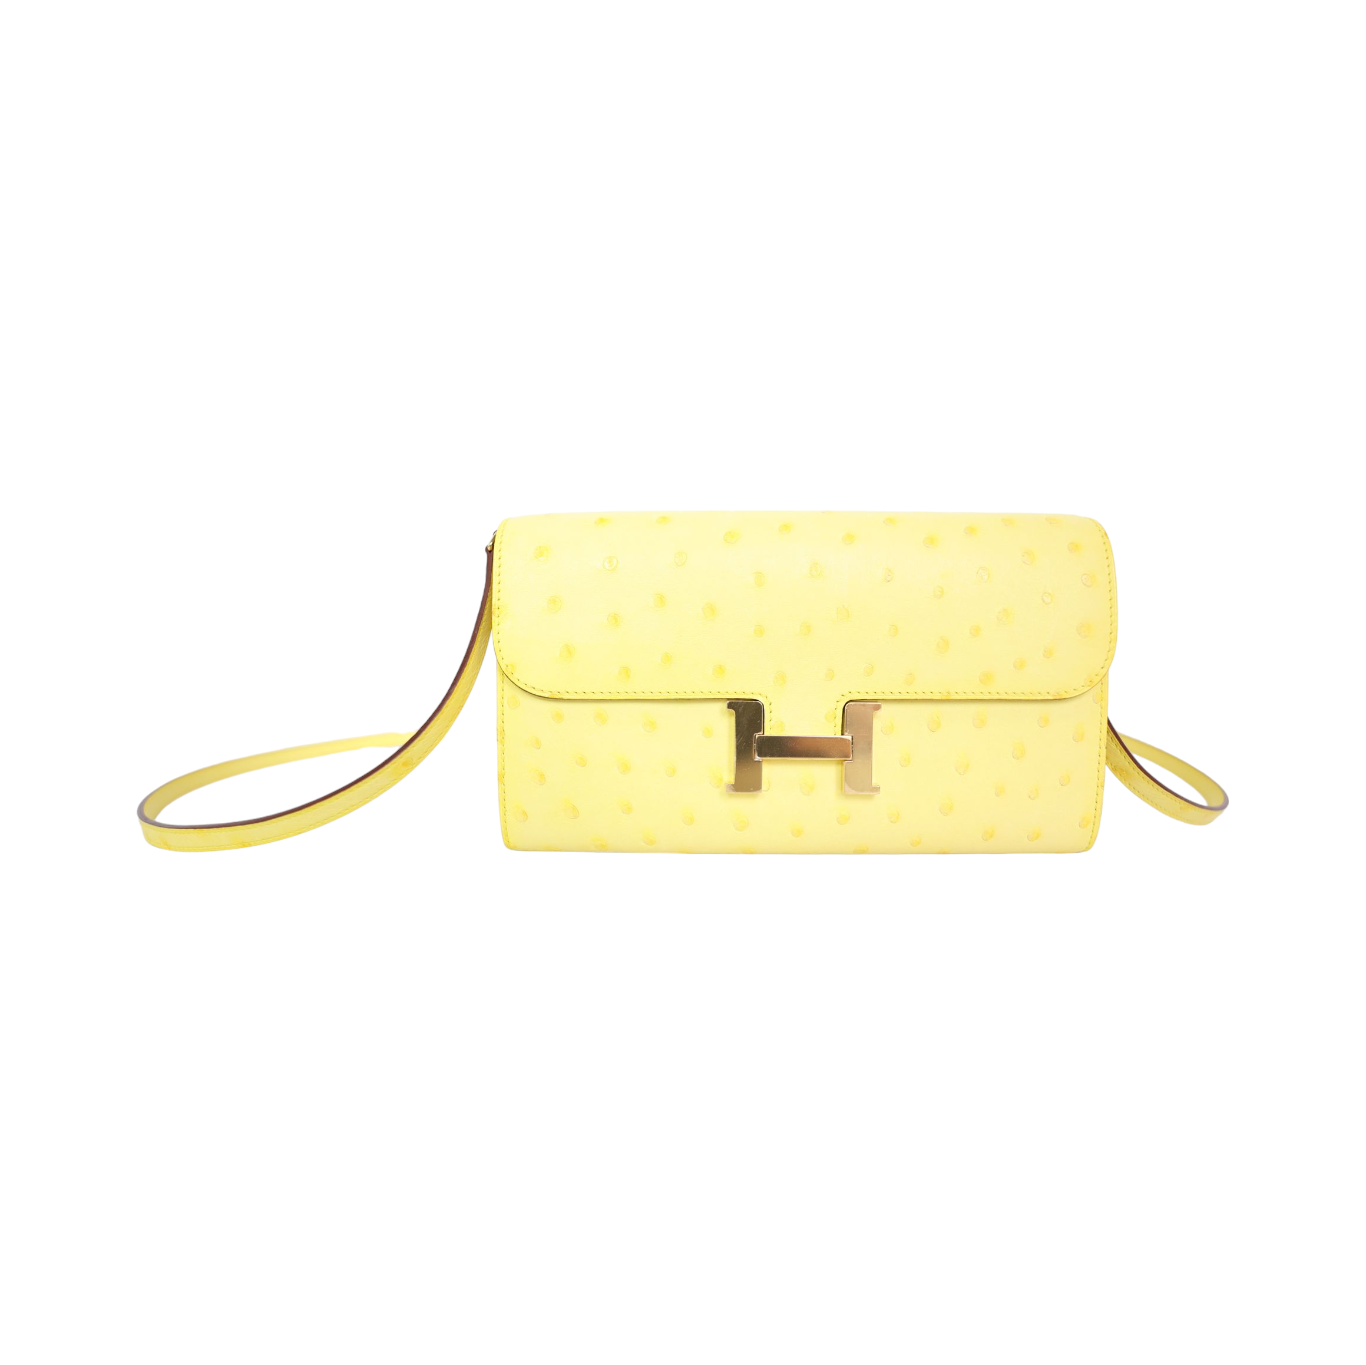 Hermes Constance Long Wallet To Go, Ostrich Jaune Citron With Gold Hardware, New In Box WA001